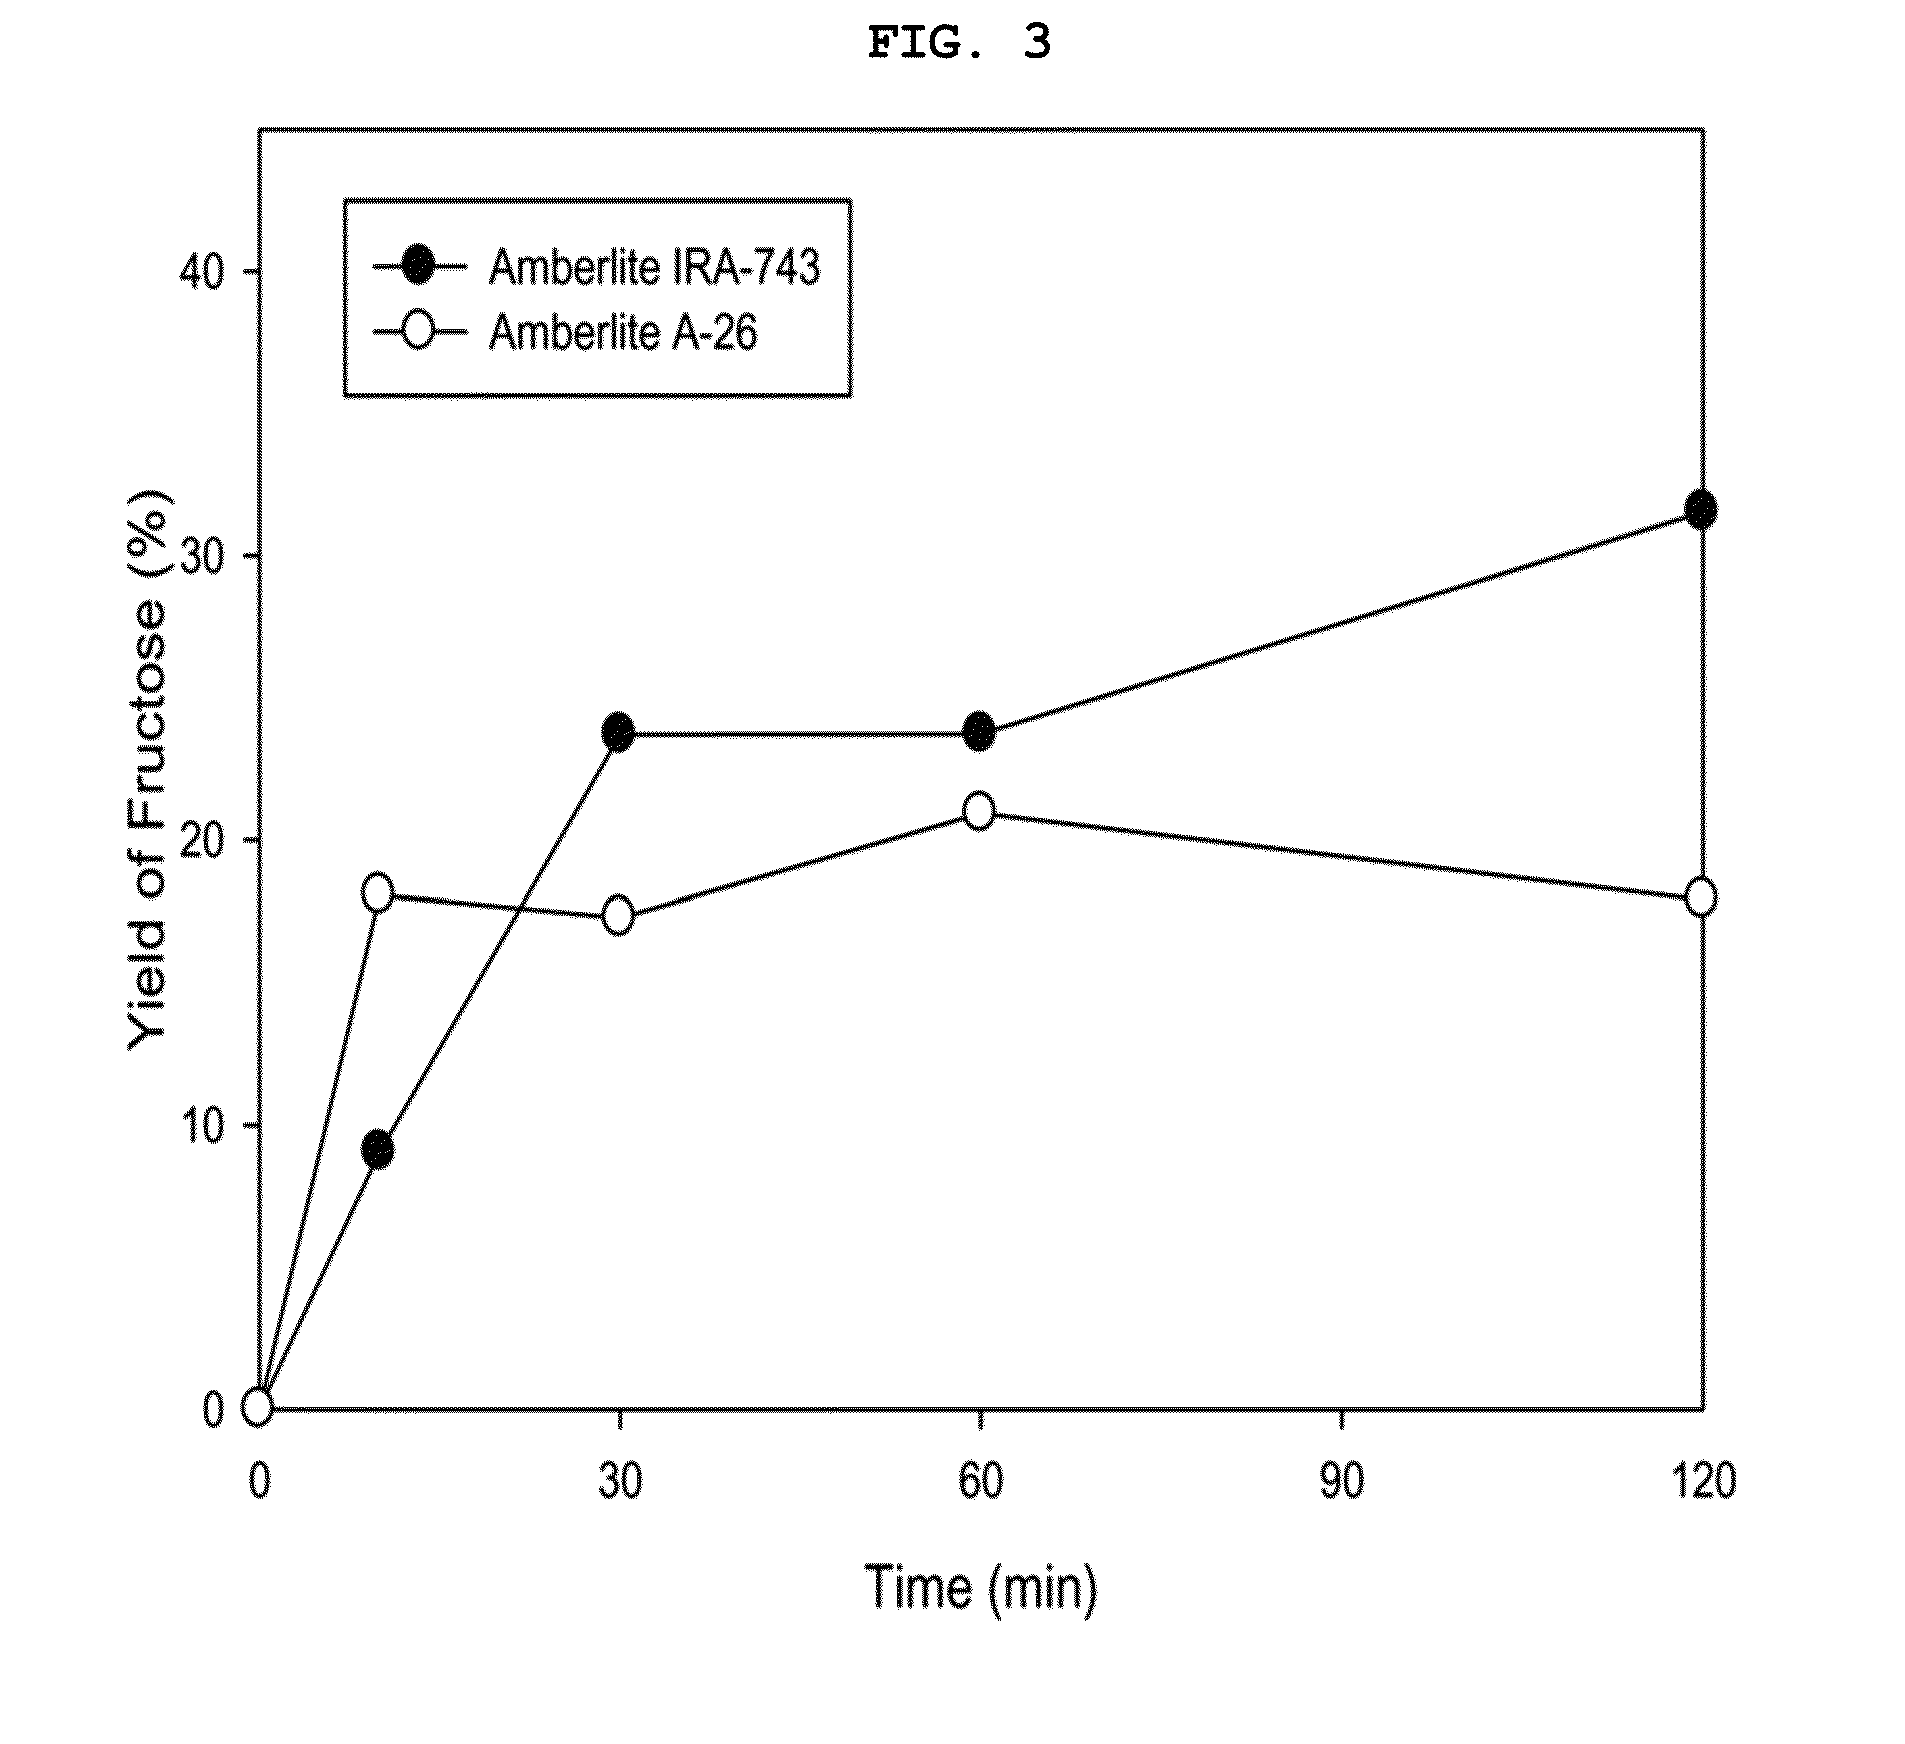 Method for producing 5-hydroxymethyl-2-furfural or alkyl ether derivatives thereof using an ion exchange resin in the presence of an organic solvent